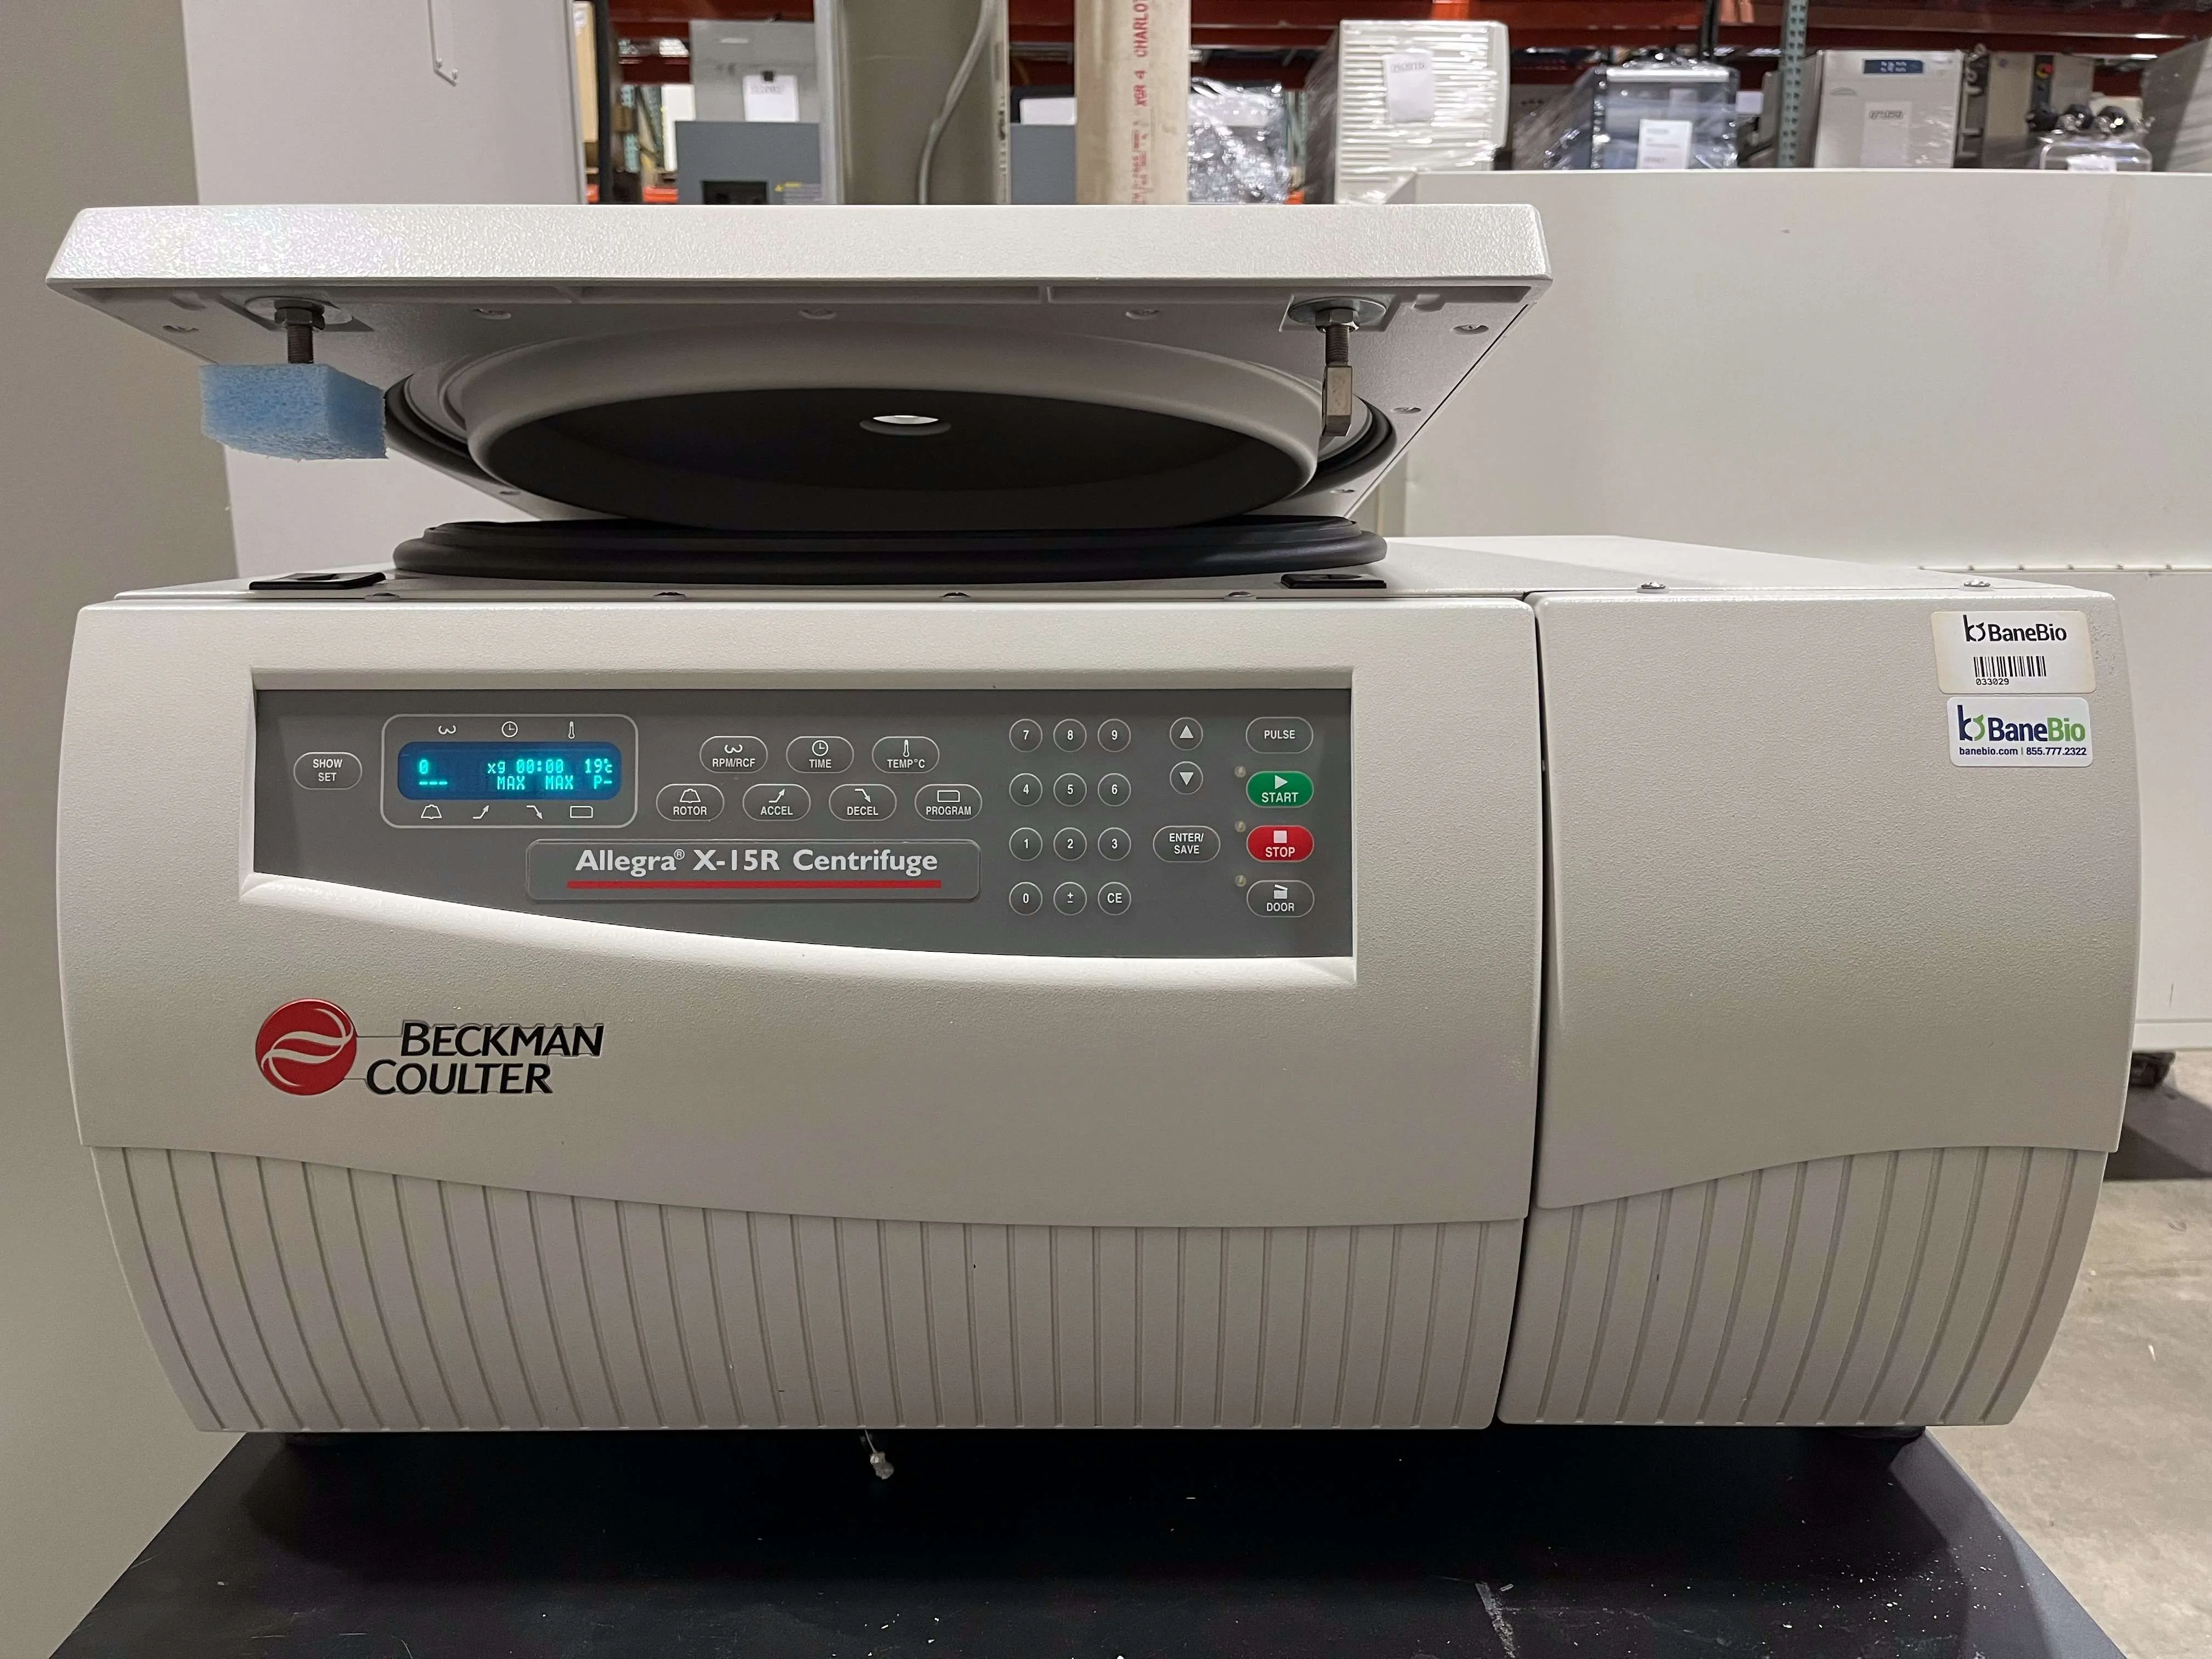 Beckman Coulter Refrigerated Centrifuge Allegra X-15R